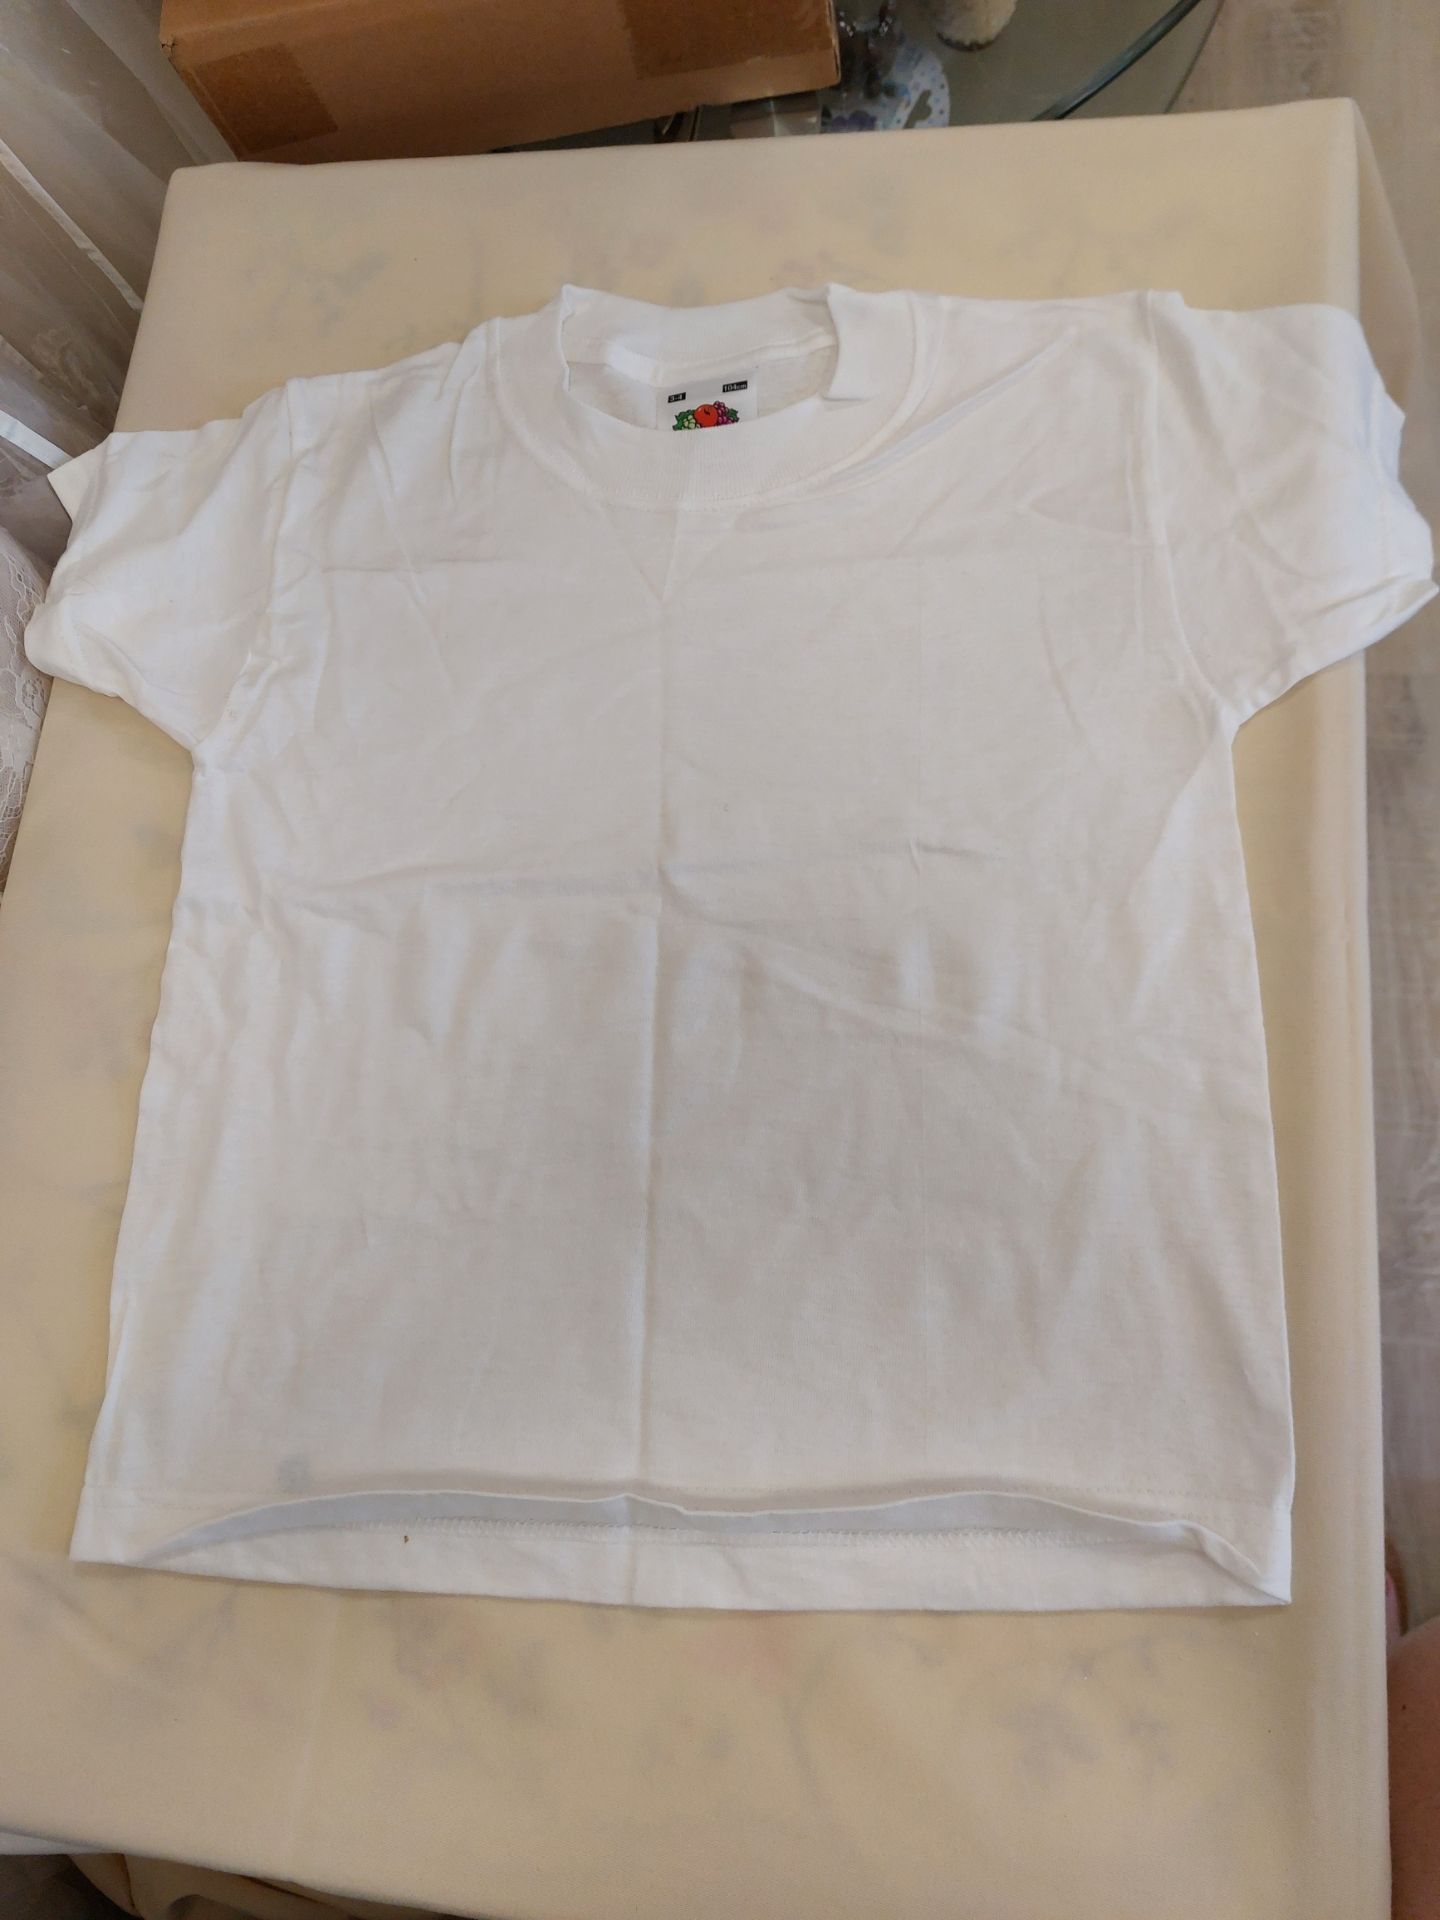 Pack of 6 White Tee-Shirts - Image 5 of 6